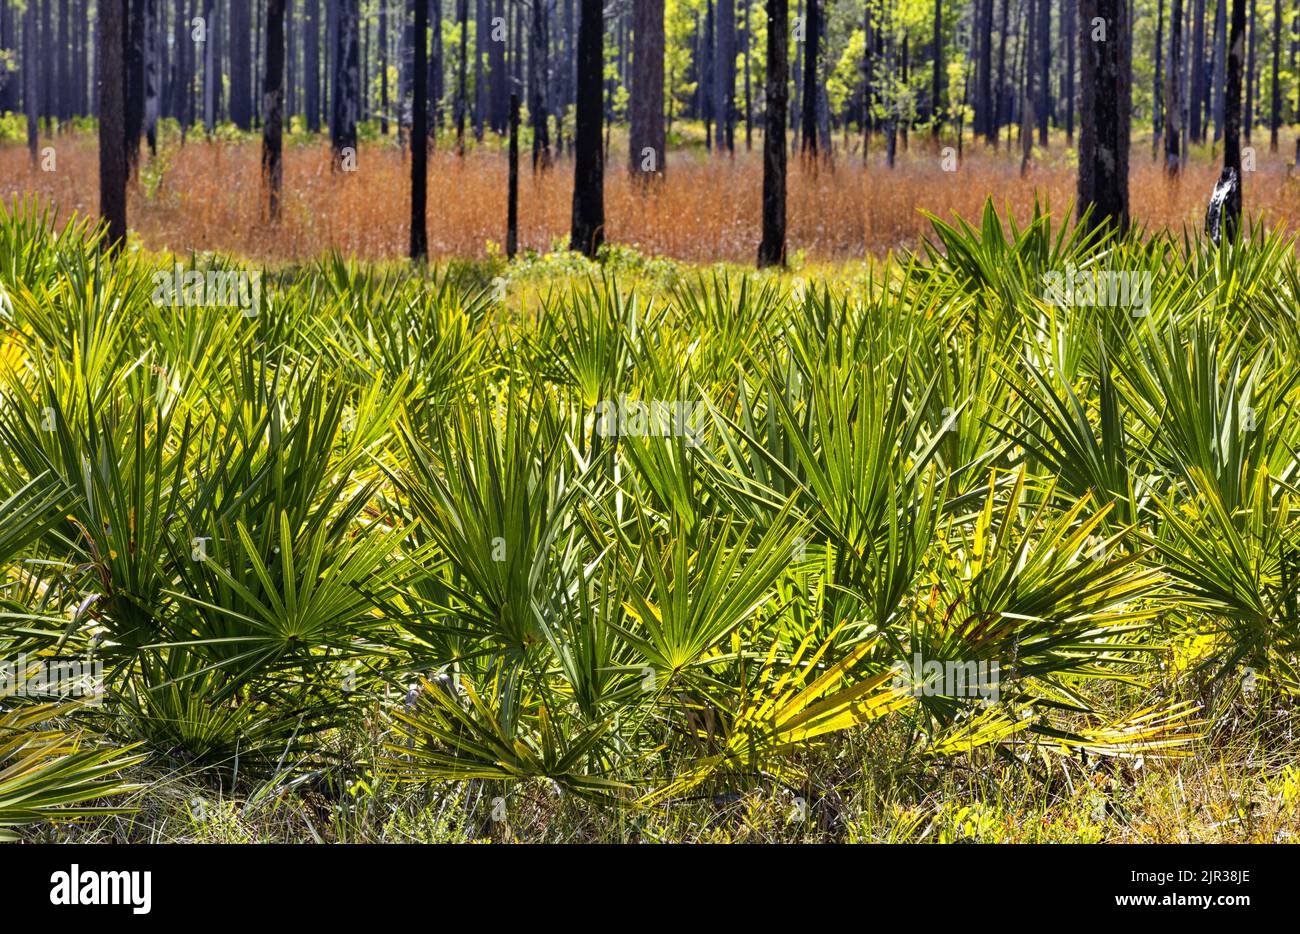 Shrubby Saw Palmetto in foreground of Longleaf Pine forest roadside scenery in Ochlockonee River State Park in Florida Panhandle Stock Photo